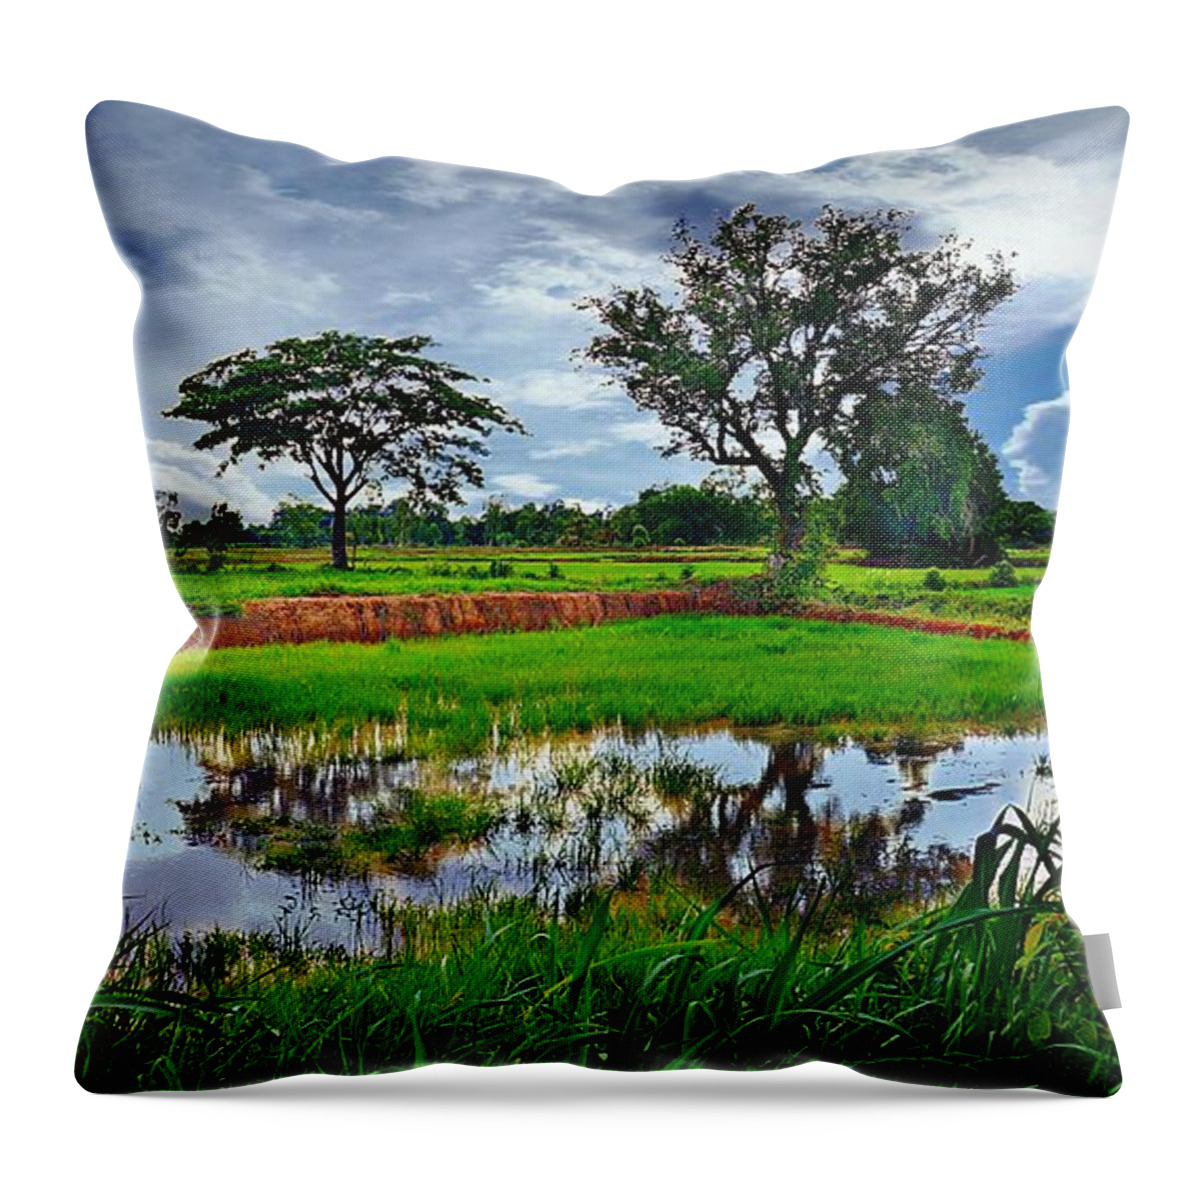 Rural Throw Pillow featuring the photograph Rice Paddy View by Ian Gledhill